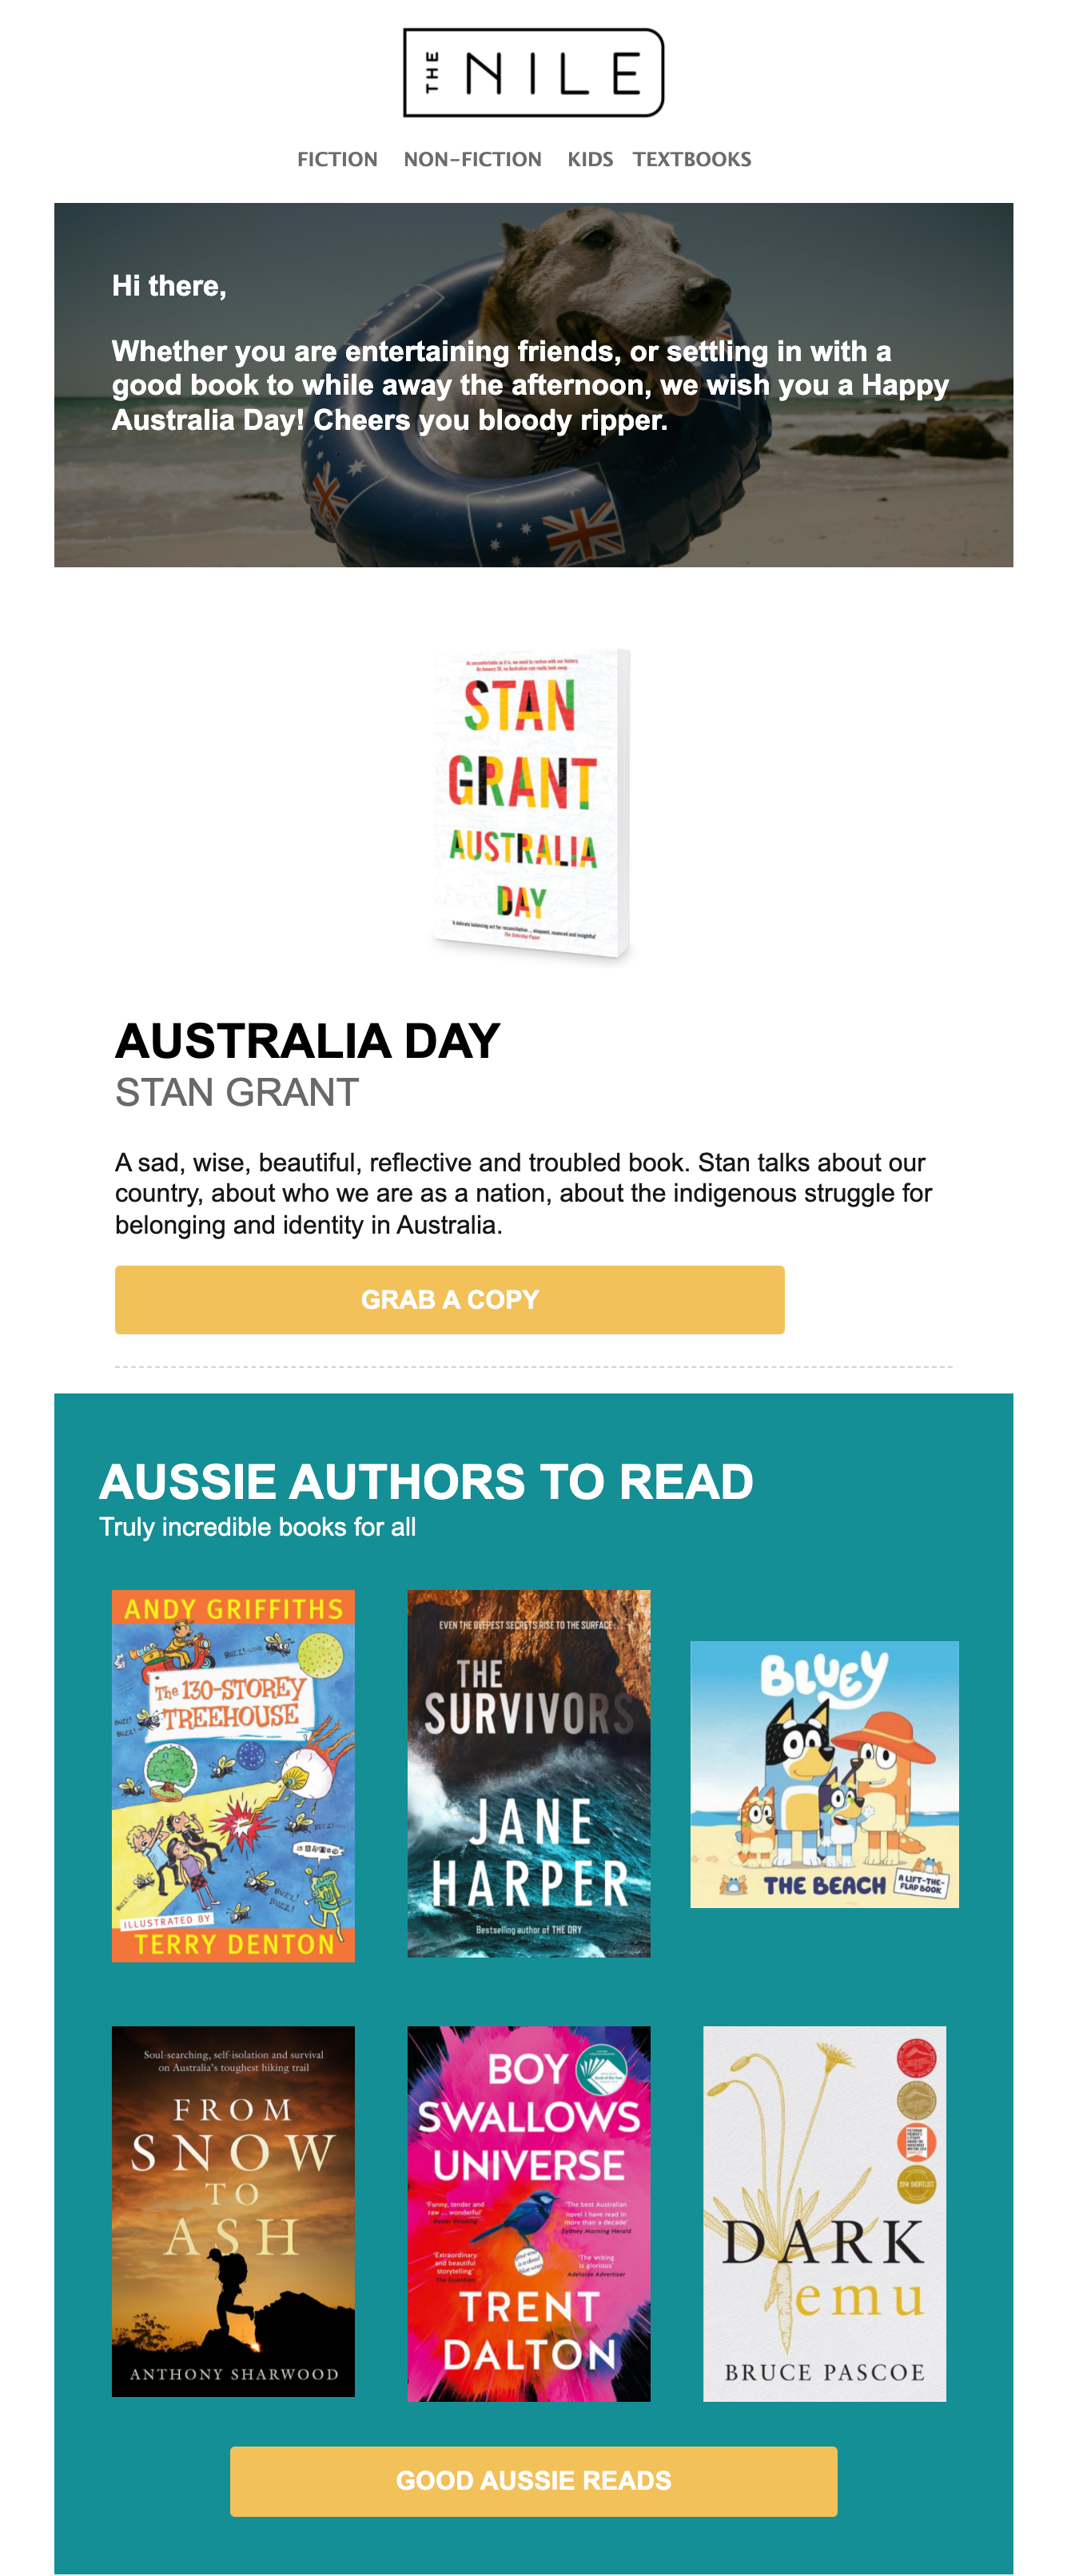 Australia Day-themed newsletter, with author recommendations